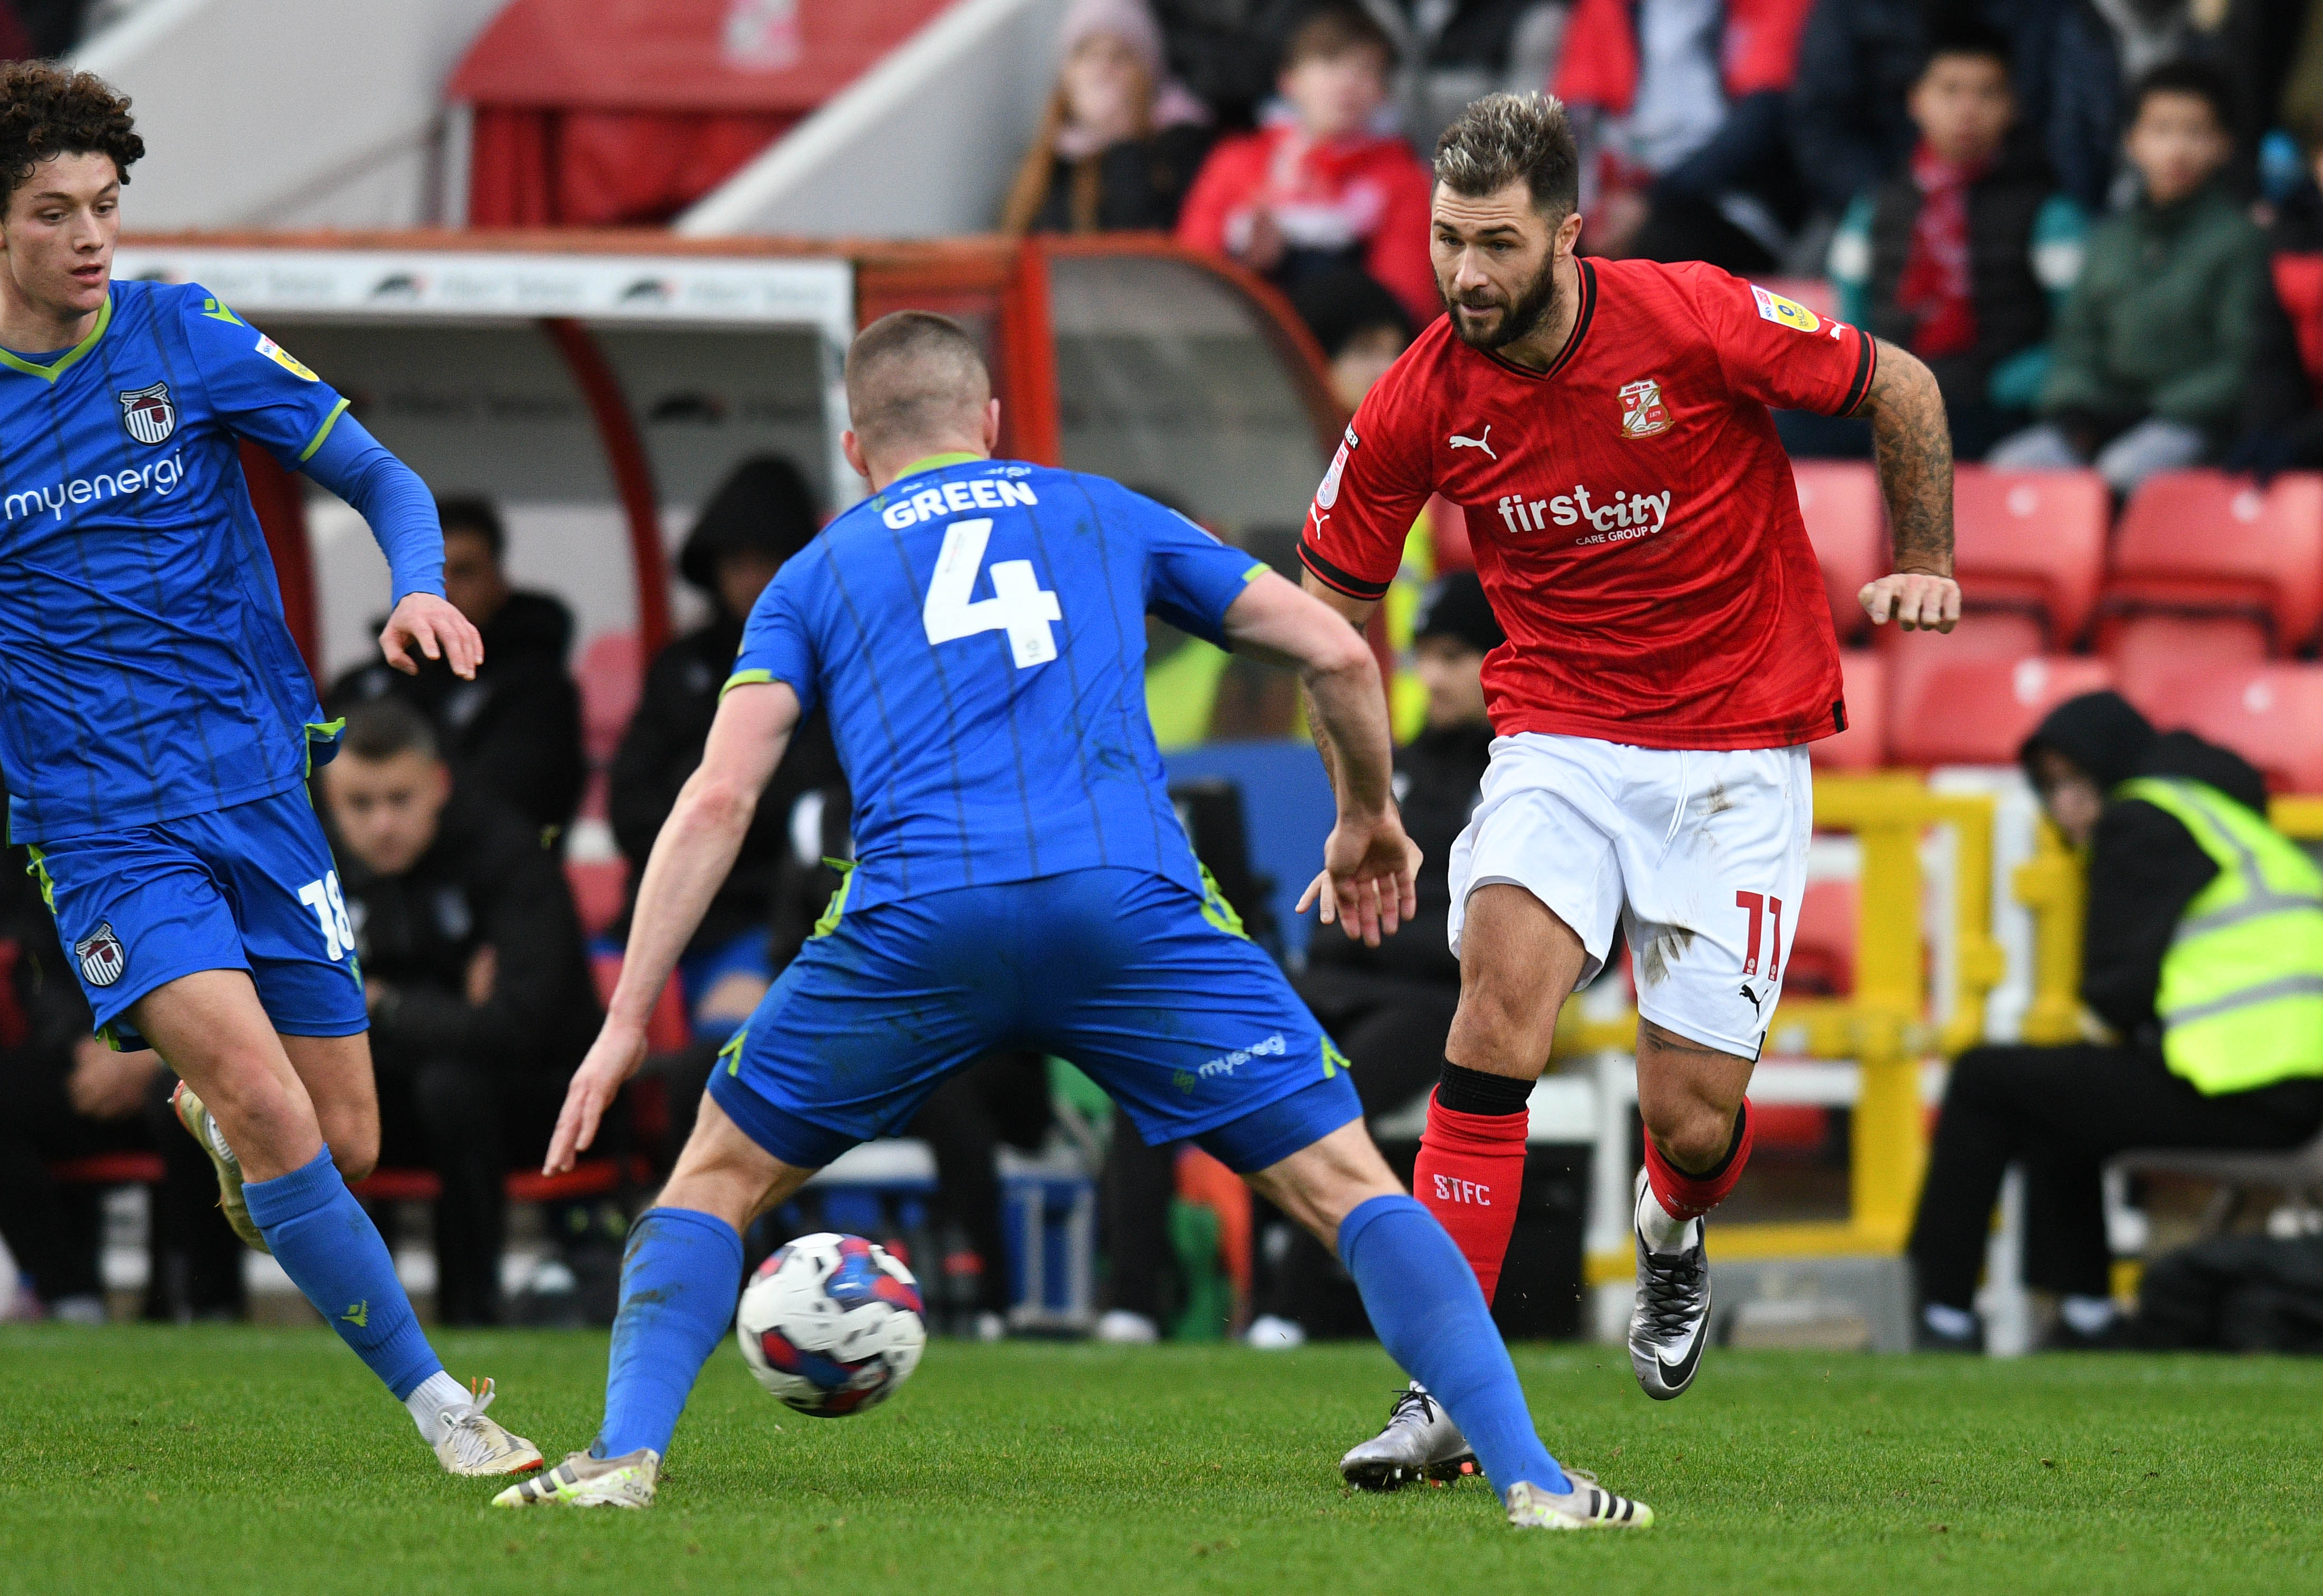 Charlie Austin and Gavin Gunning said that Swindon being less patient was key to success against Grimsby